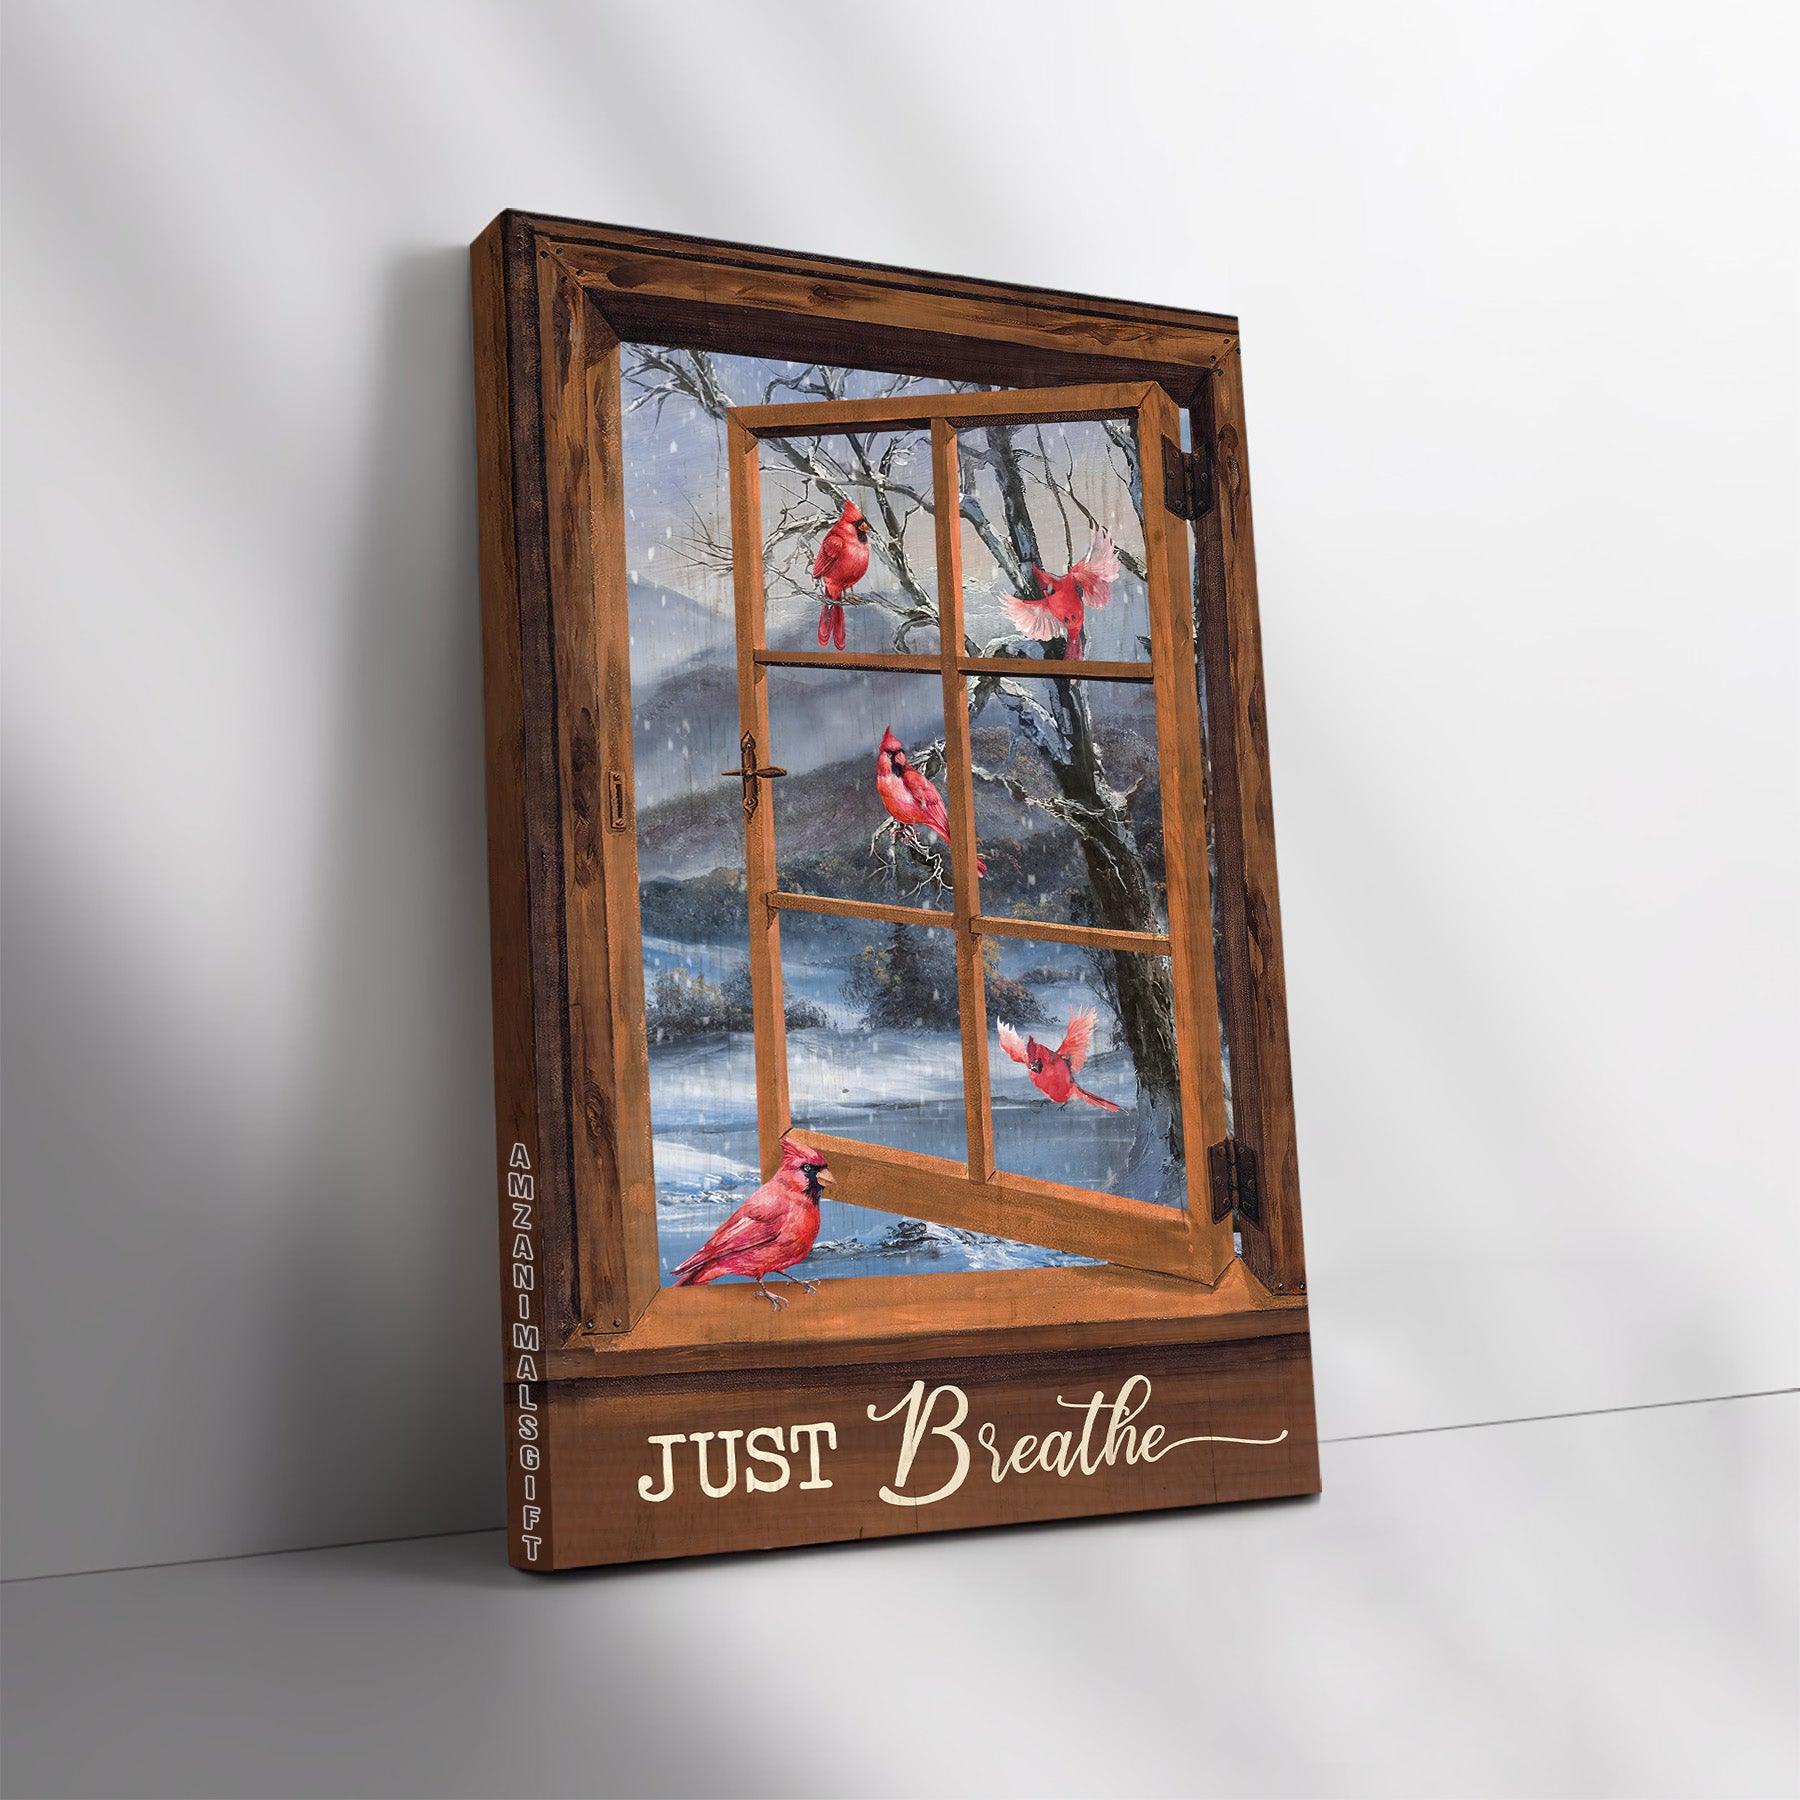 Memorial Premium Wrapped Portrait Canvas - Blue Night, Red Cardinal Drawing, Wooden Window, White Snow, Just Breathe - Heaven Gift For Members Family - Amzanimalsgift